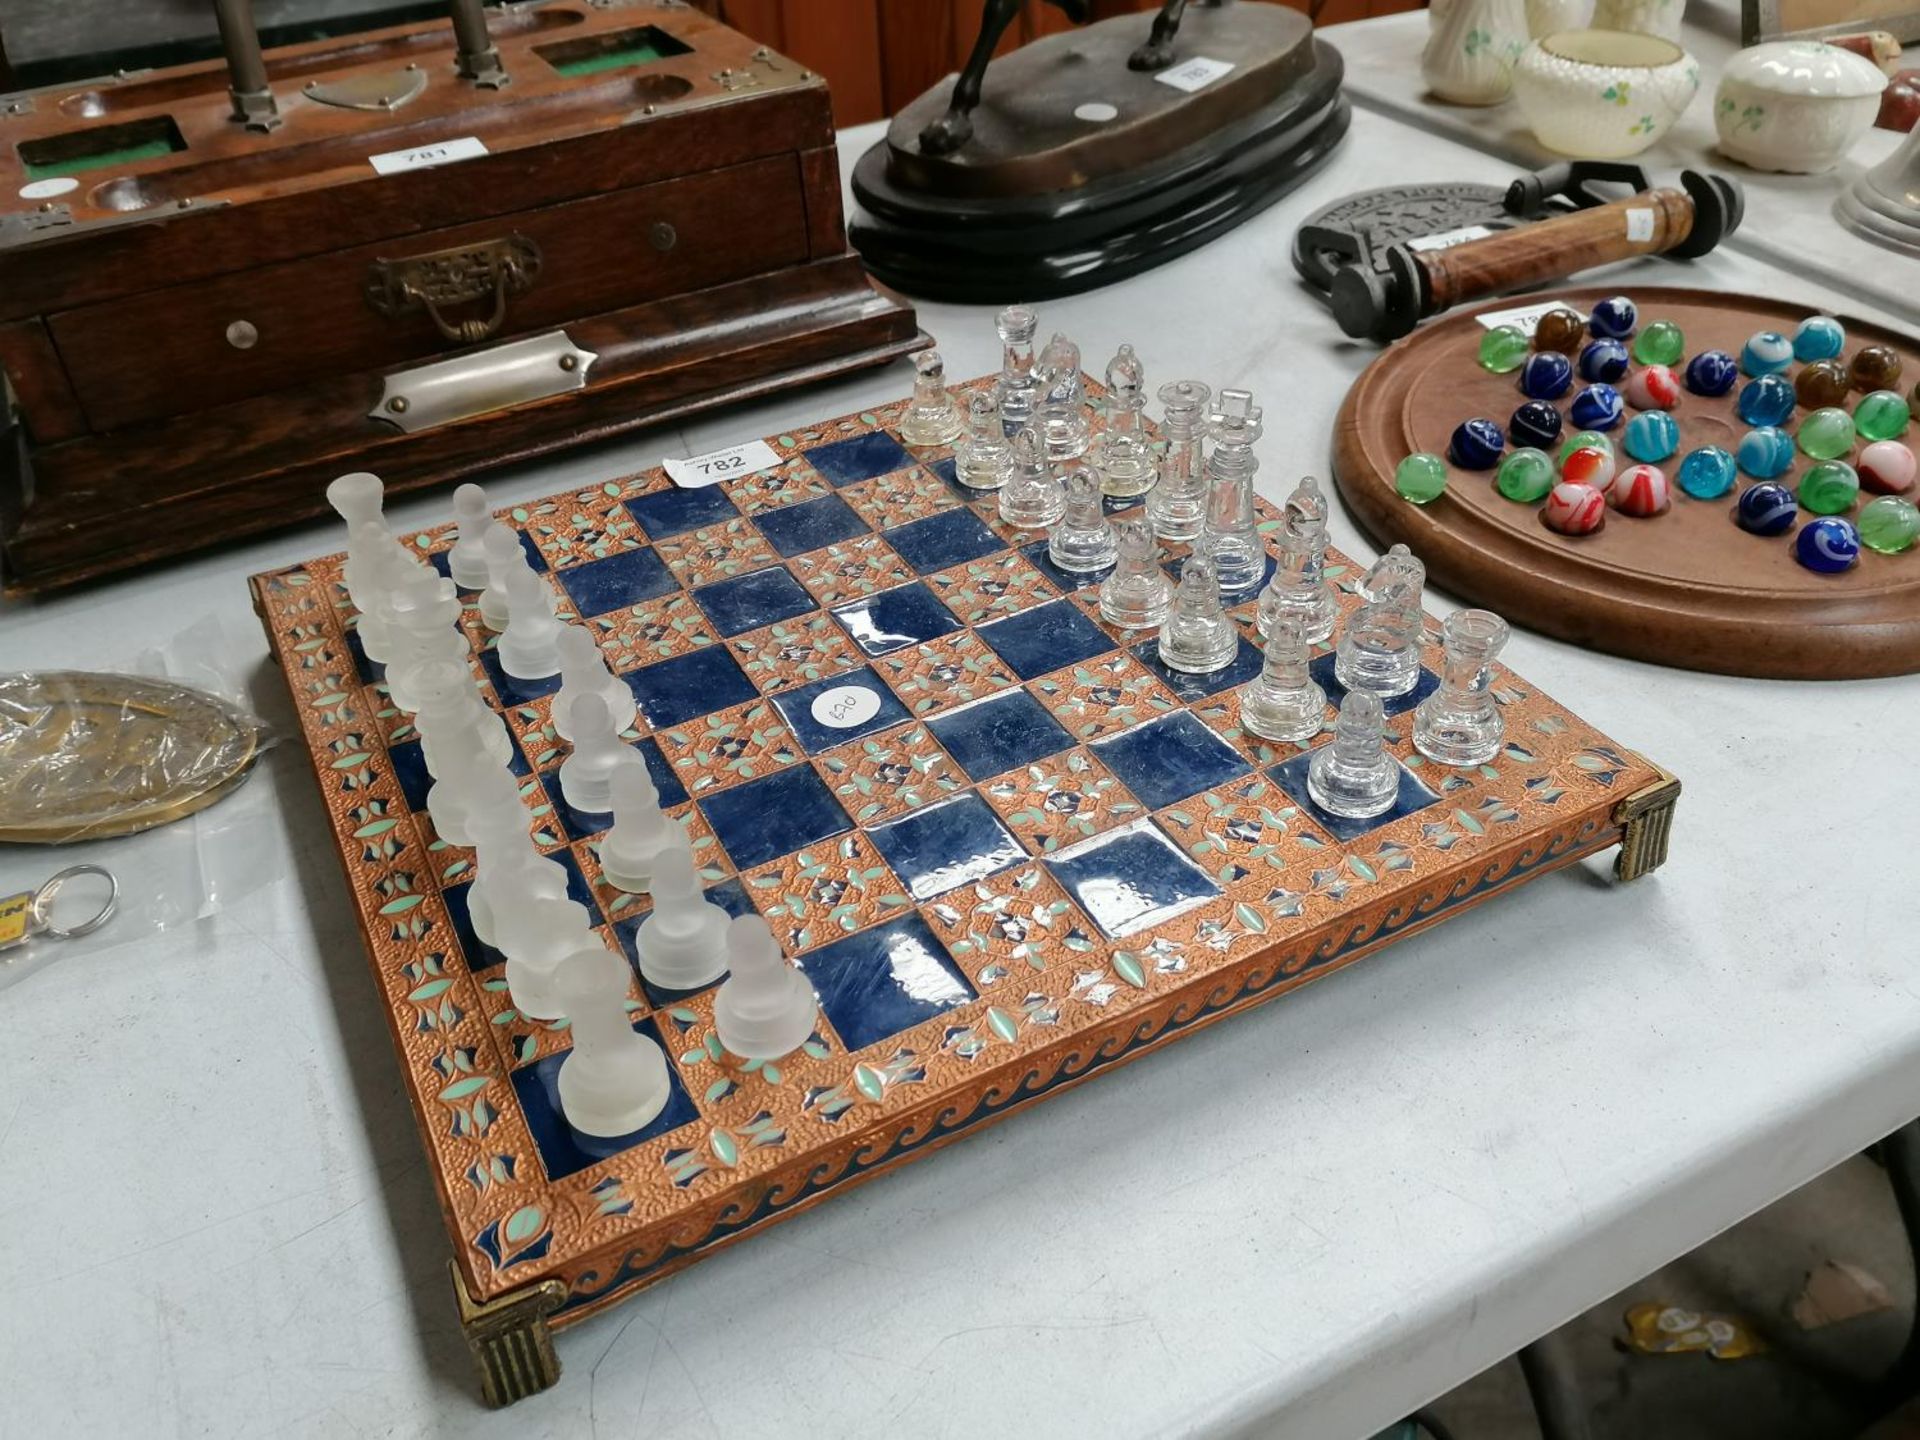 A MIDDLE EASTERN DESIGN CHESS SET - Image 2 of 2